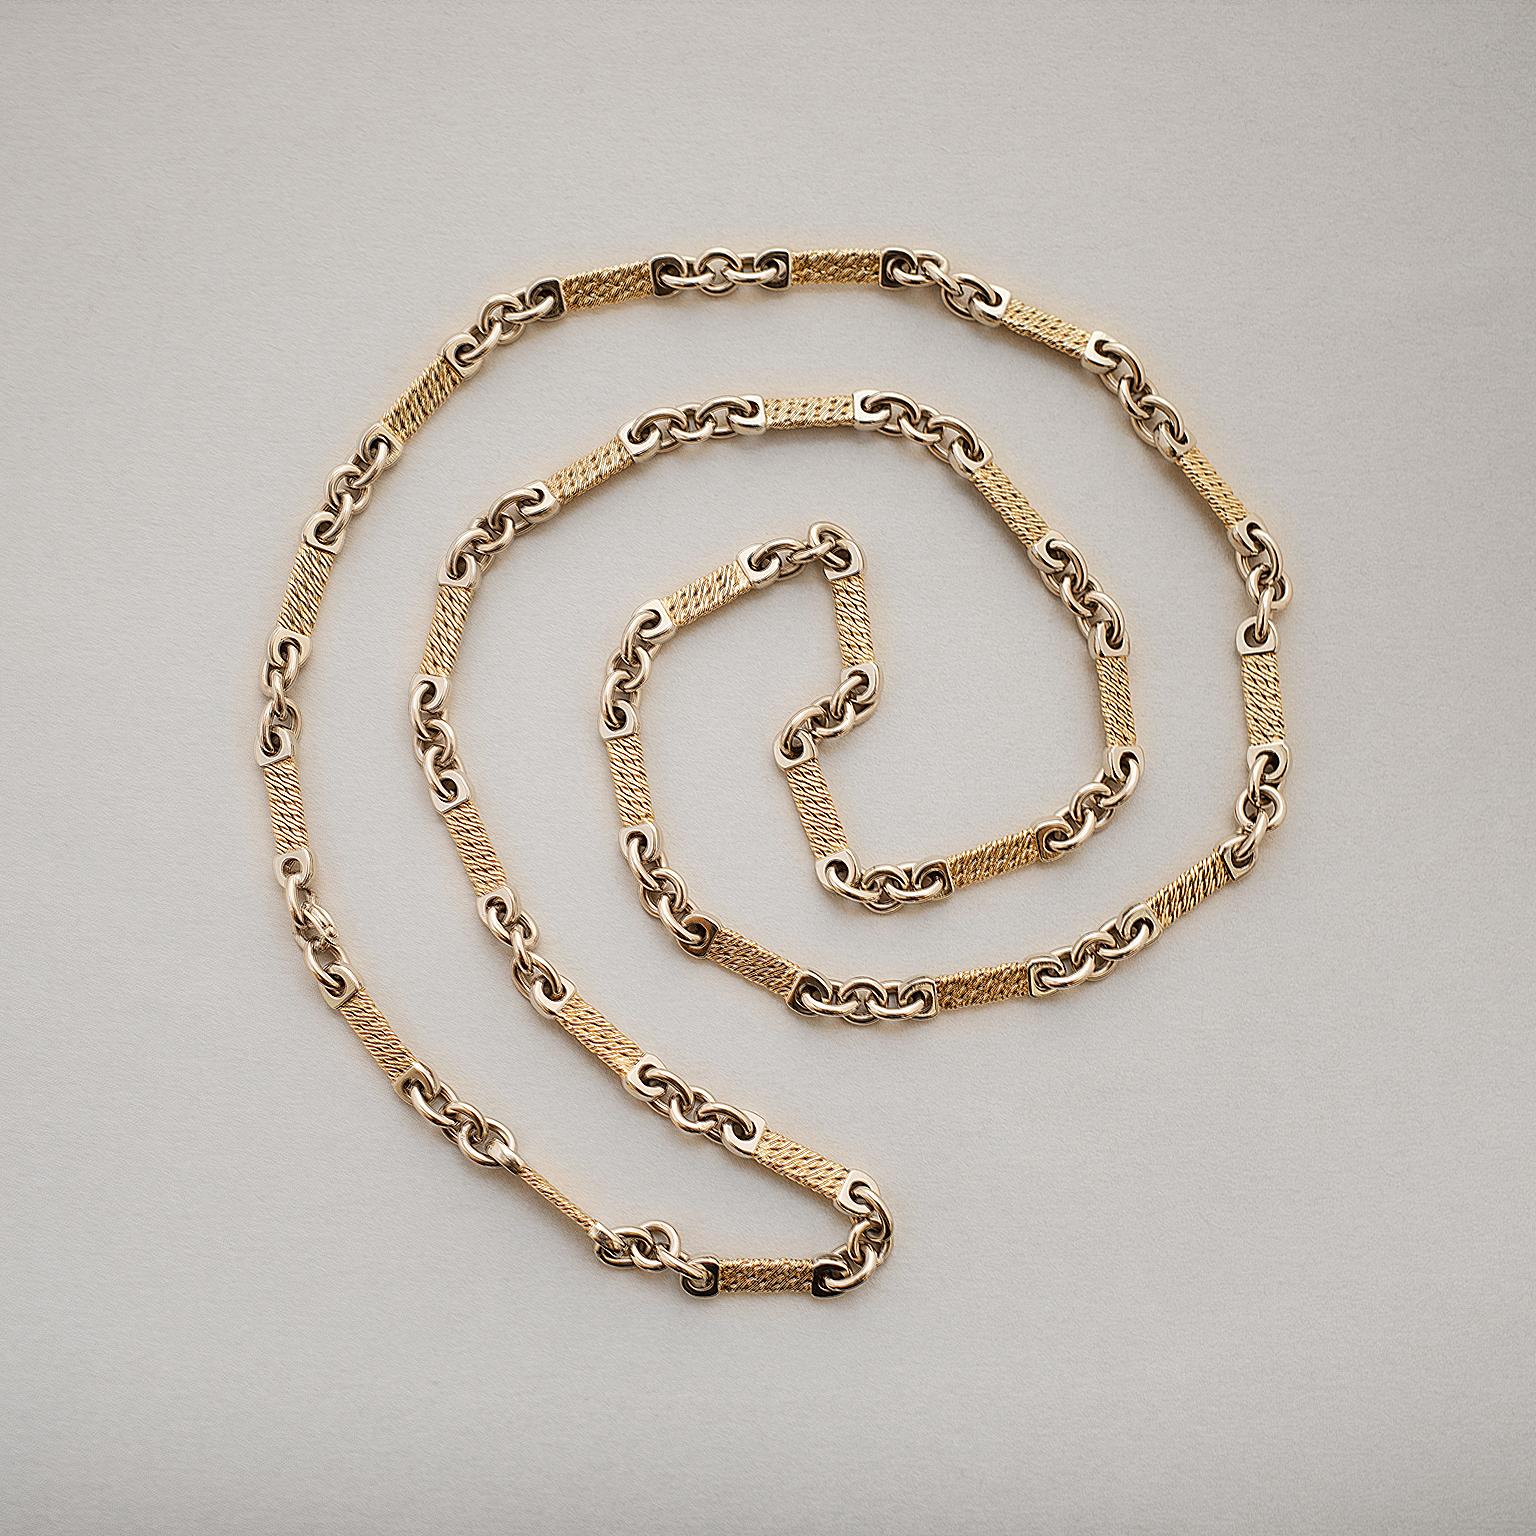 A bi-color 18 carat gold long chain with yellow gold textured flat links with white gold polished ends, master mark: Georges Lenfant, France circa 1970.

weight: 79 grams
length: 81 cm
width: 5 mm